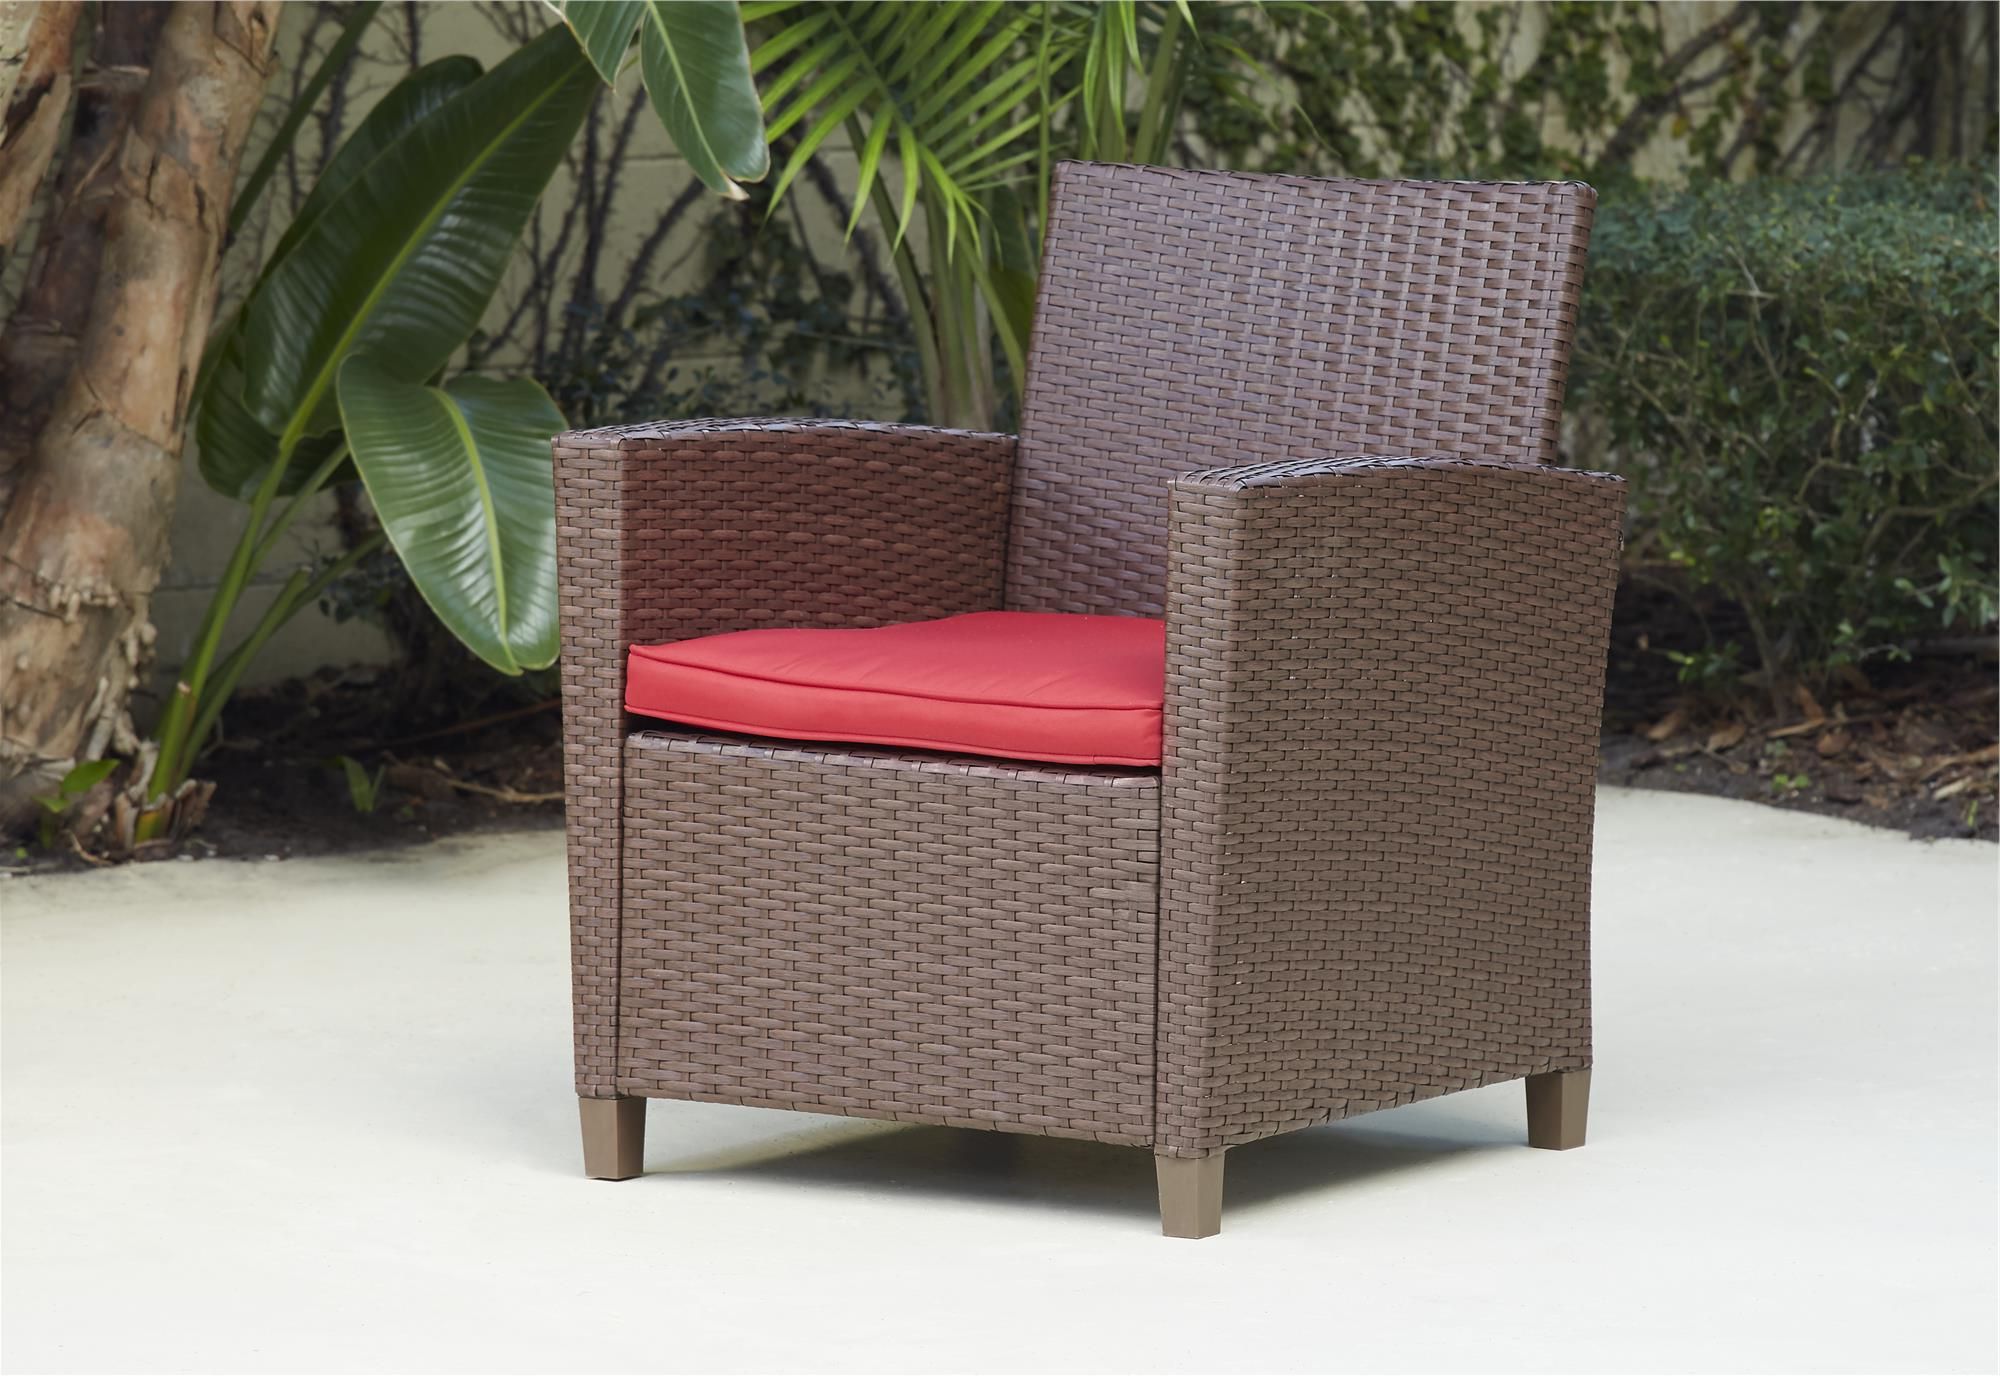 4 Piece Wicker Outdoor Seating Sets Pertaining To Fashionable Cosco Outdoor 4 Piece Malmo Resin Wicker Patio Deep Seating (View 12 of 15)